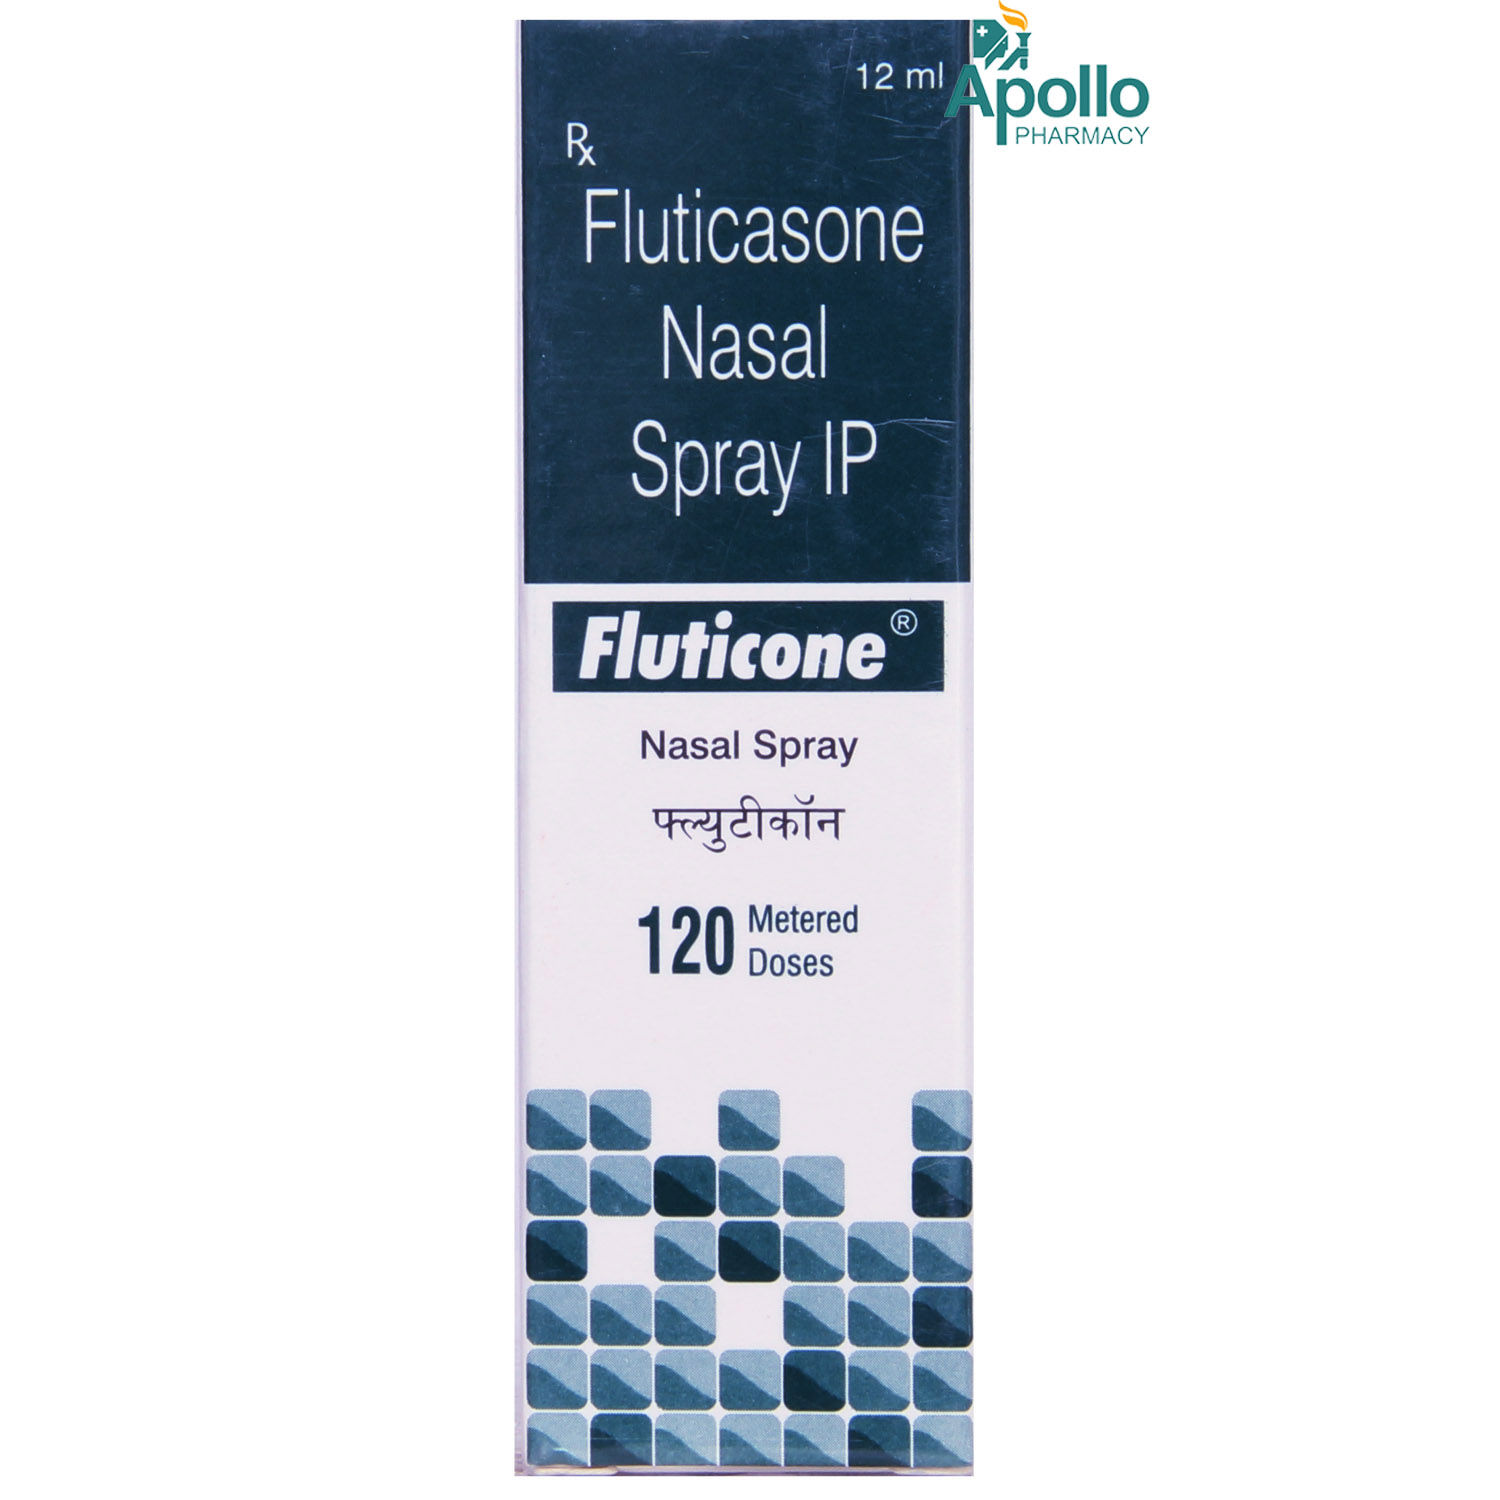 Fluticone Nasal 12 ml Side Effects, Composition Apollo Pharmacy